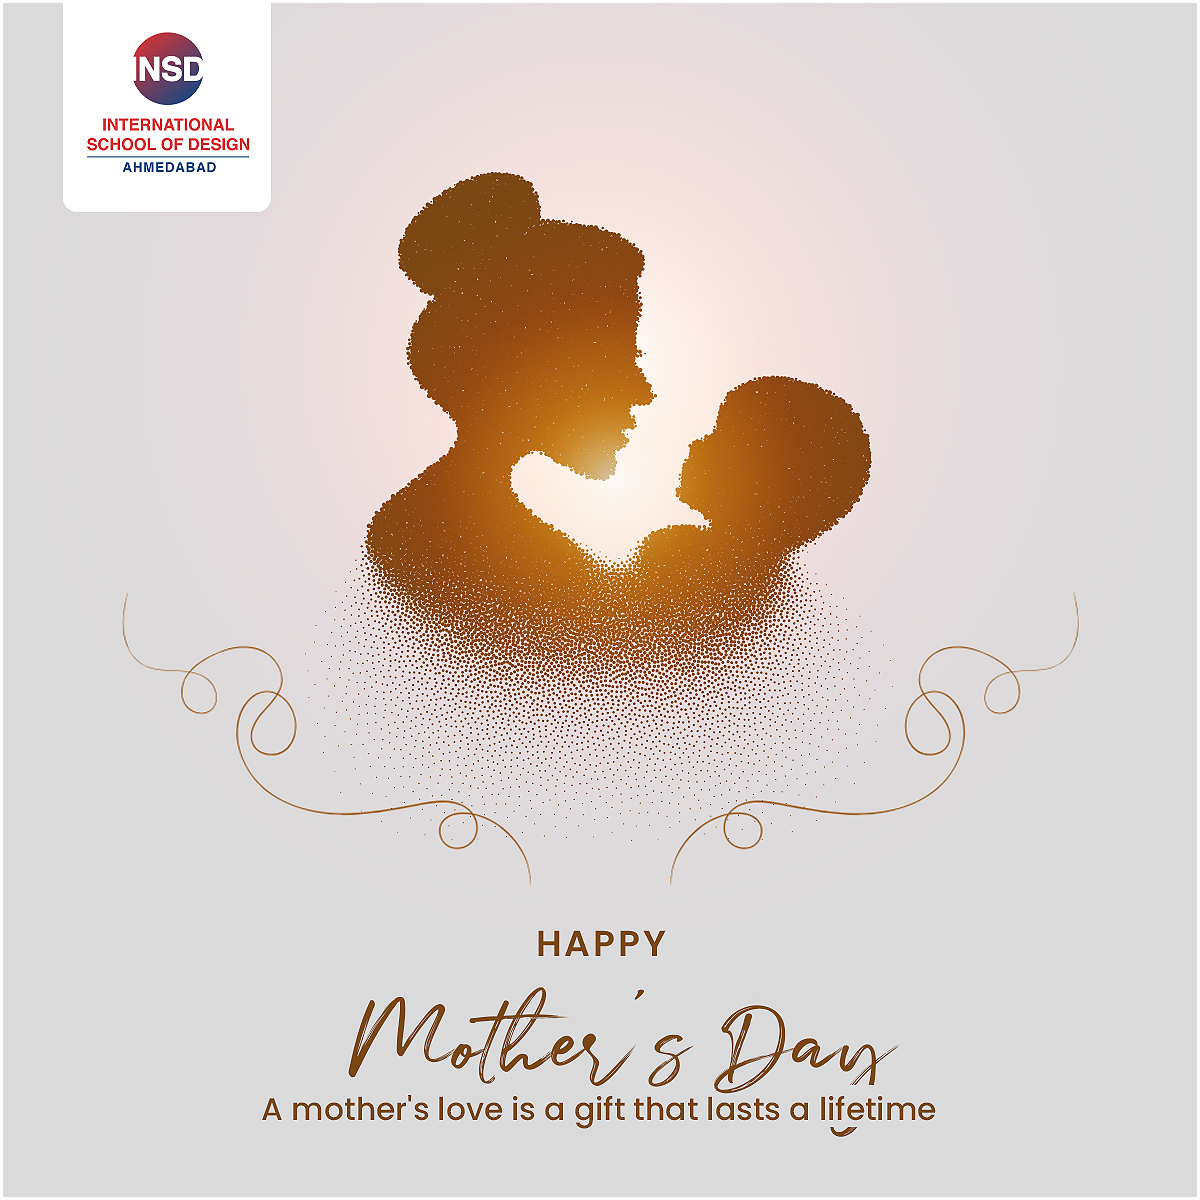 A mother's love knows no bounds, and she is the perfect example of that. Happy Mother's Day!

#mothersday #mothersdaygift #love #happymothersday #mom #mother #family #motherhood  #momlife #mothers #mothersdaygifts #flowers #mothersdaygiftideas #motherslove #mothers #motherspride